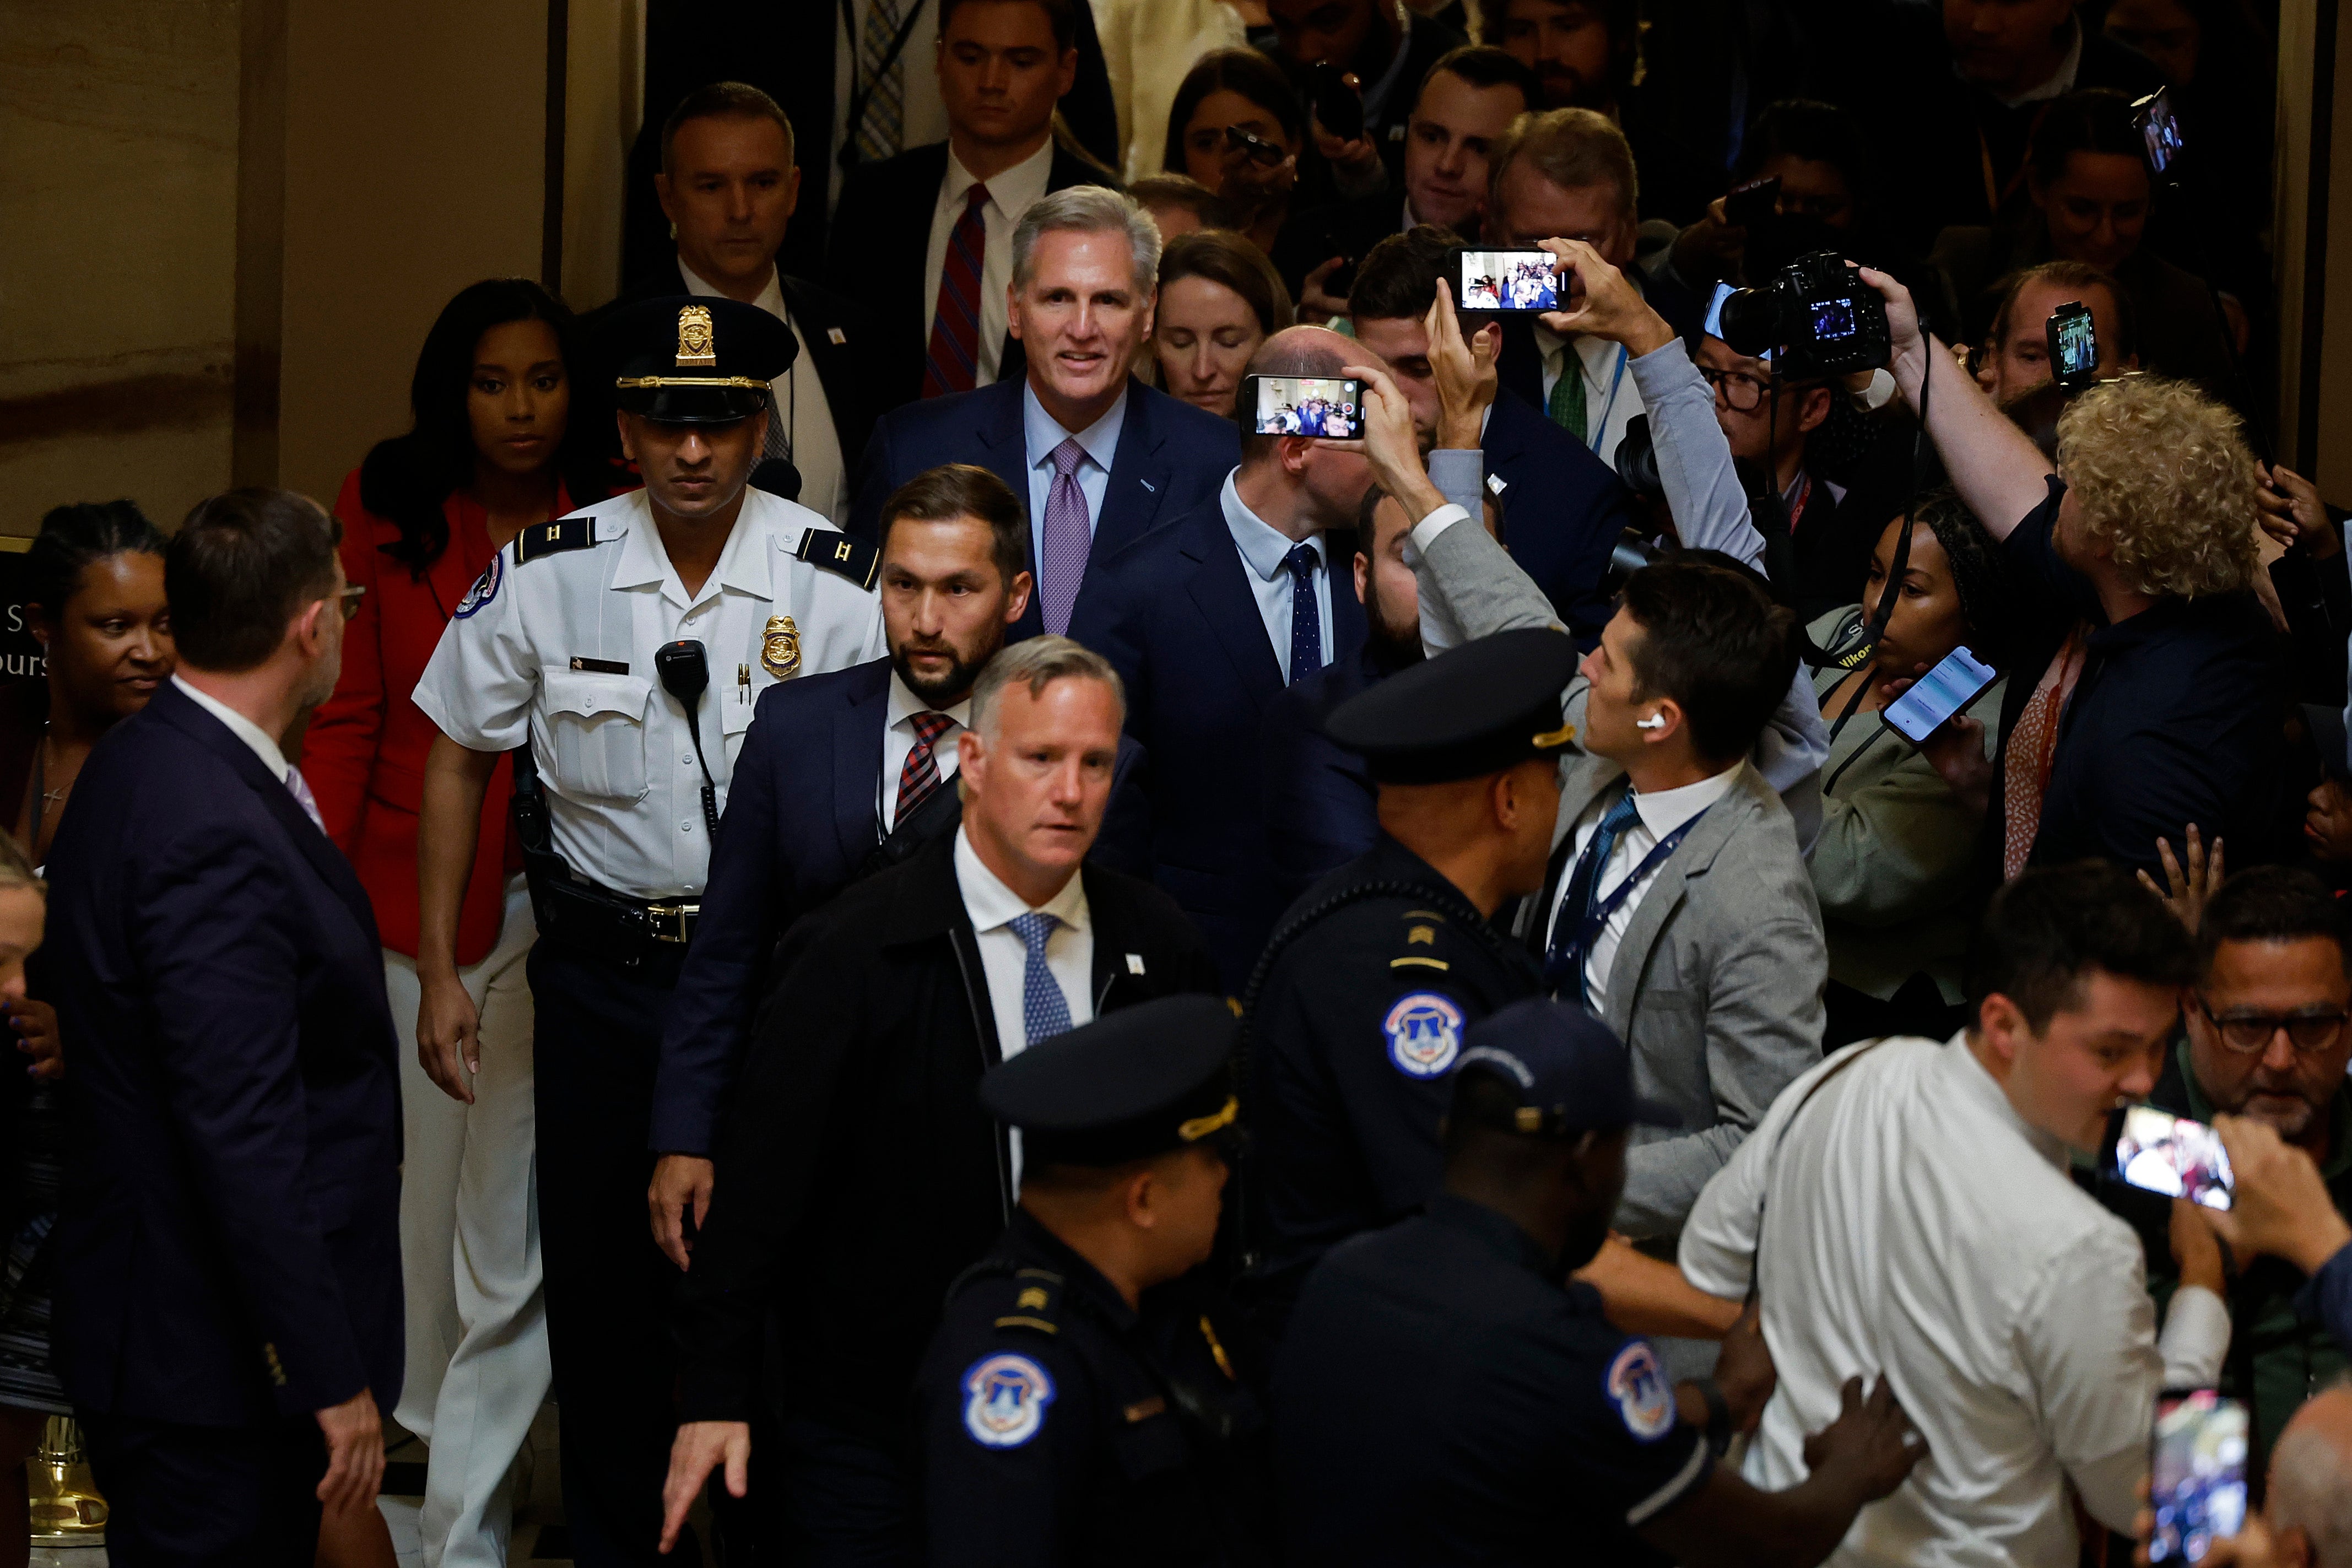 Kevin McCarthy walks through Statuary Hall after he was ousted as Speaker